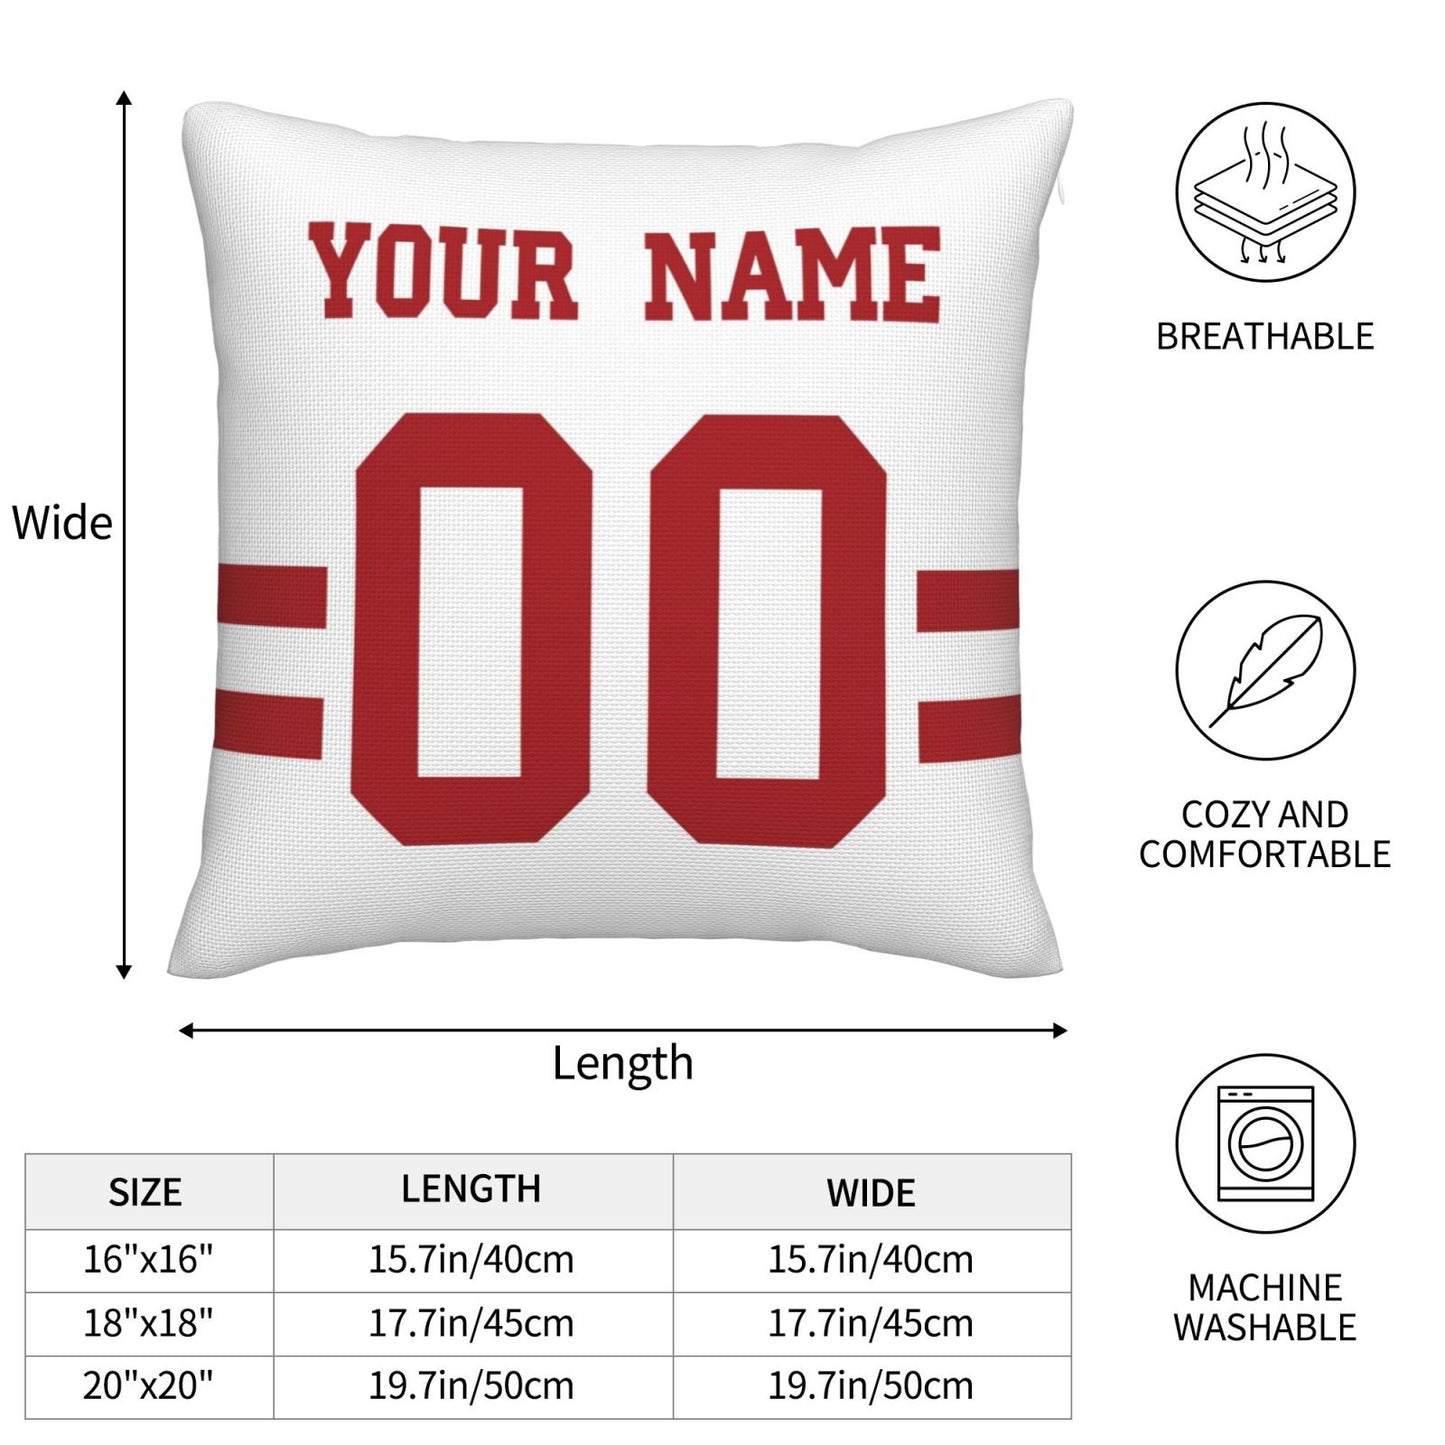 Custom Football Game San Francisco 49ers Decorative Throw Pillow Case Print Personalized Football Style Fans Name & Number Birthday Gift White